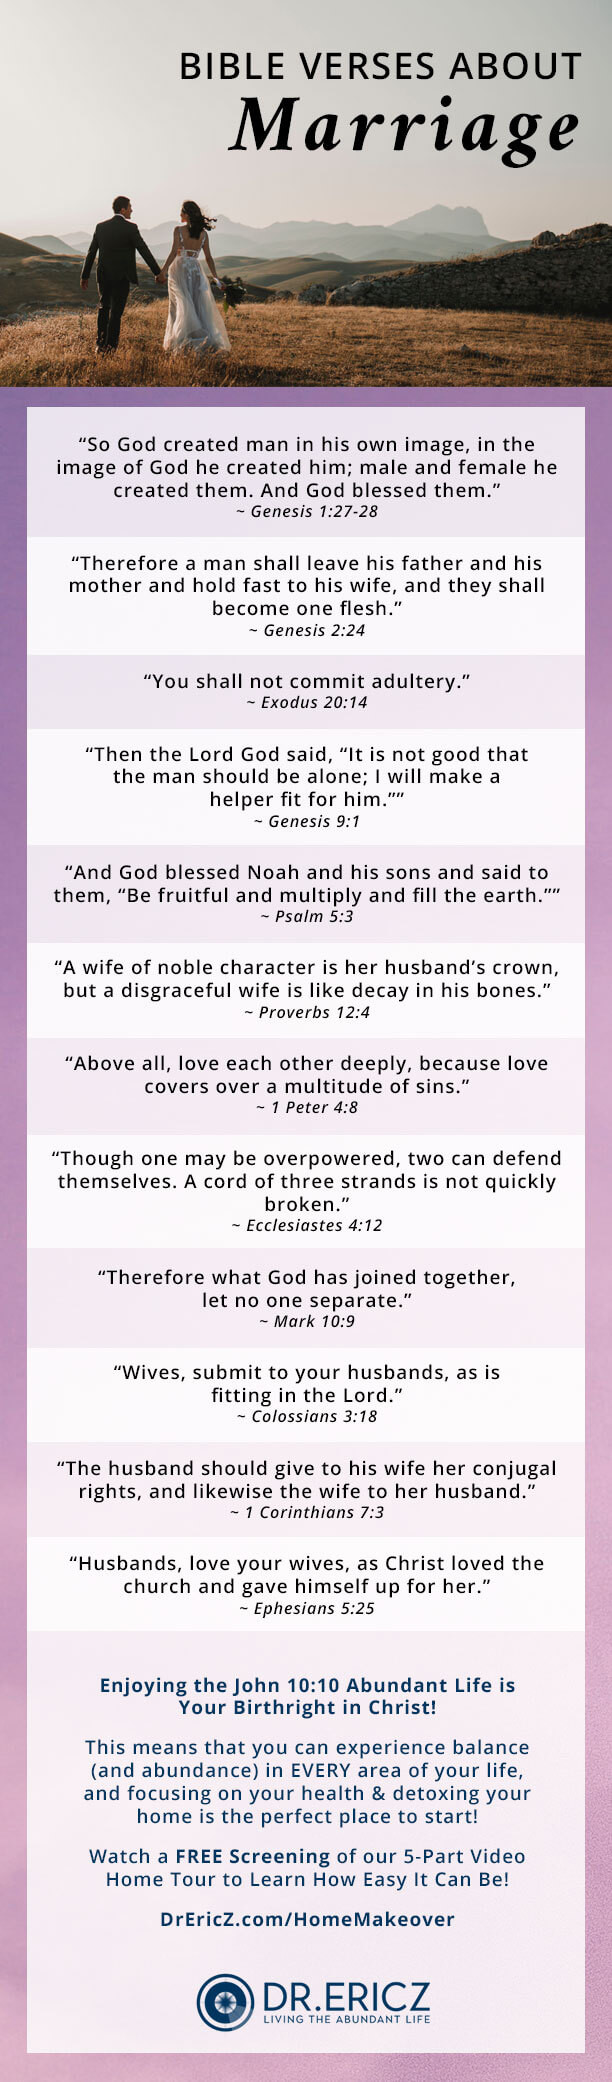 Marriage Bible Quotes
 Bible Verses About Marriage for a Strong and Vibrant